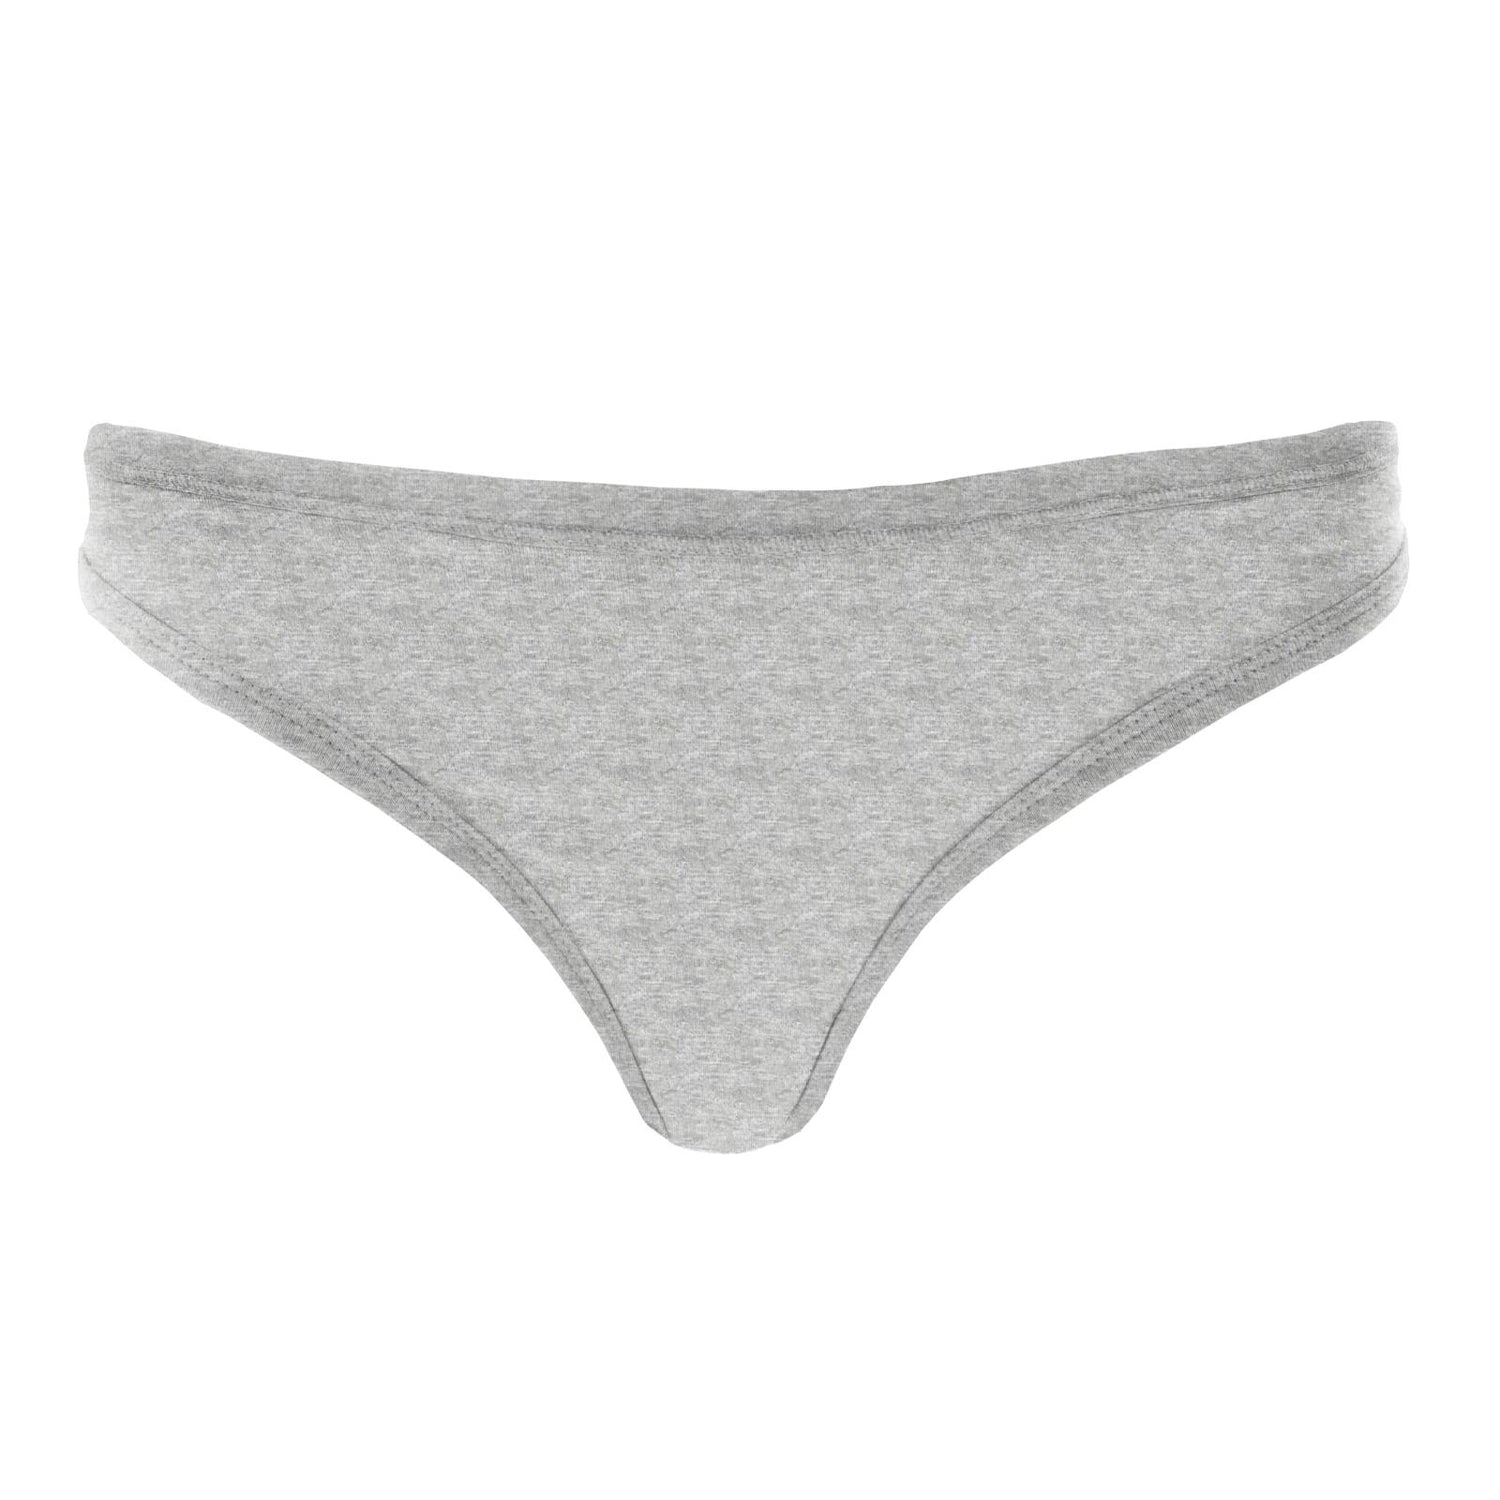 Women's Classic Thong in Heathered Mist